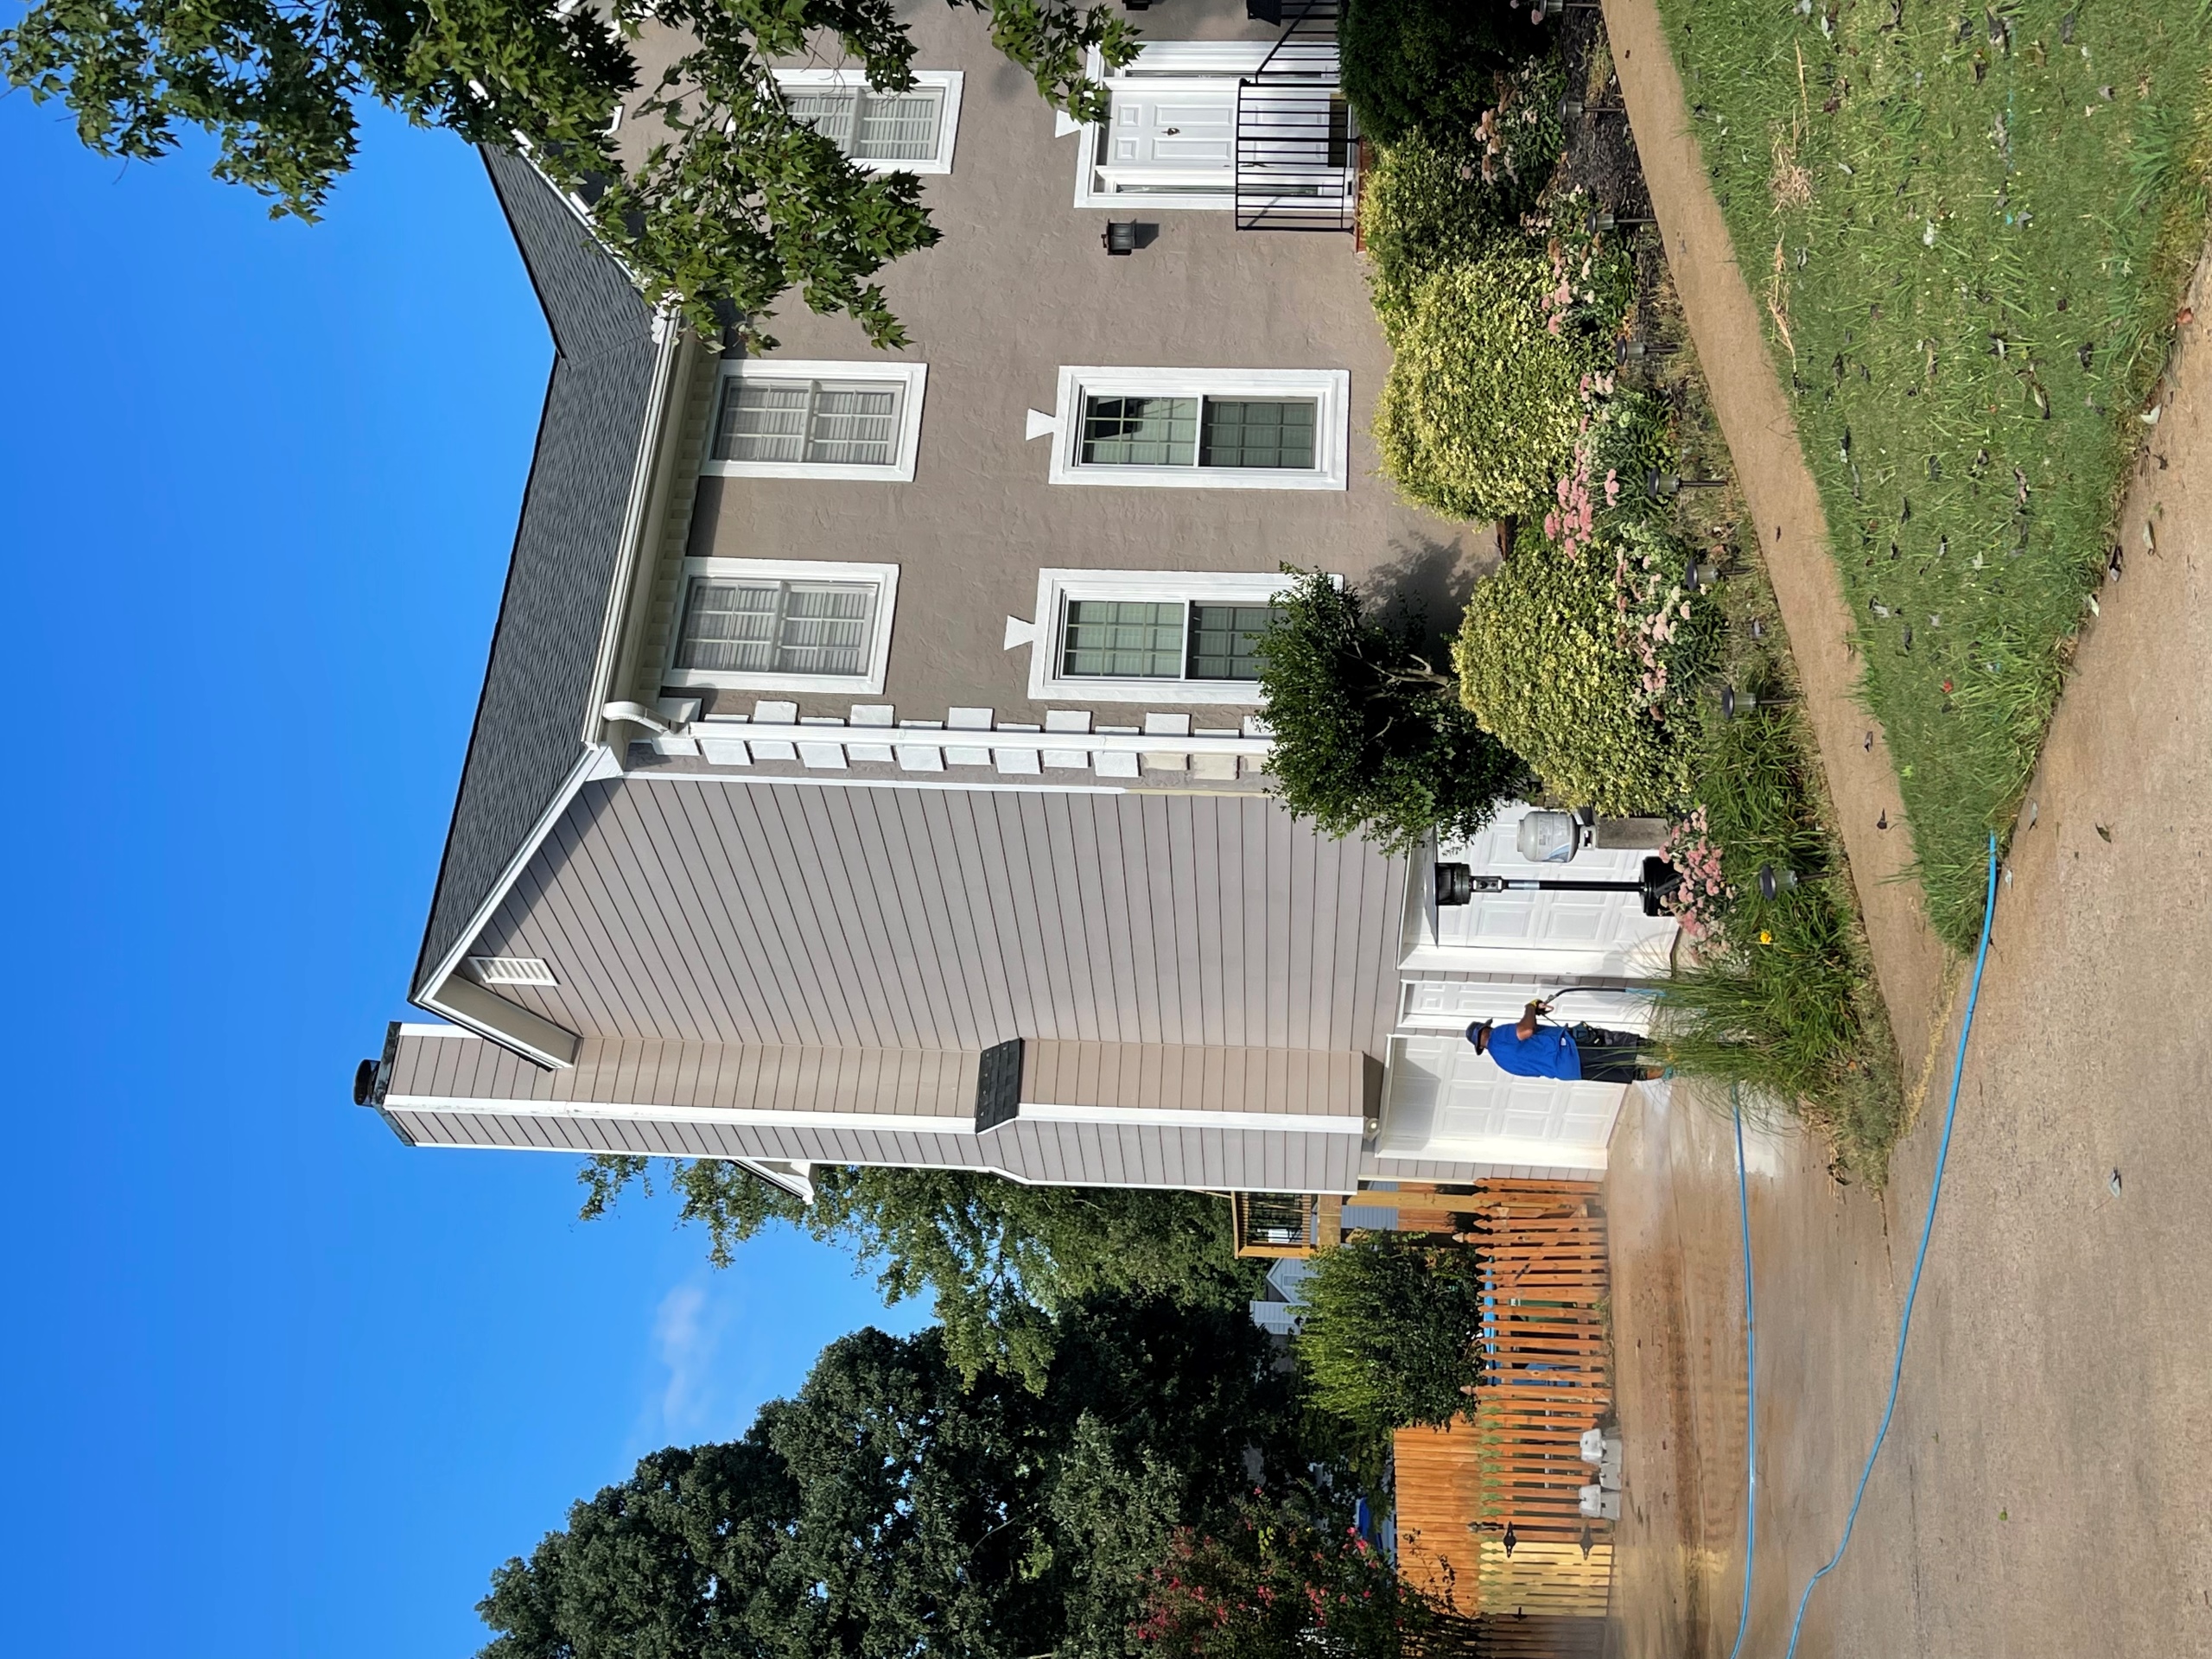 A High Quality Pressure Washing Completed in Snellville, GA